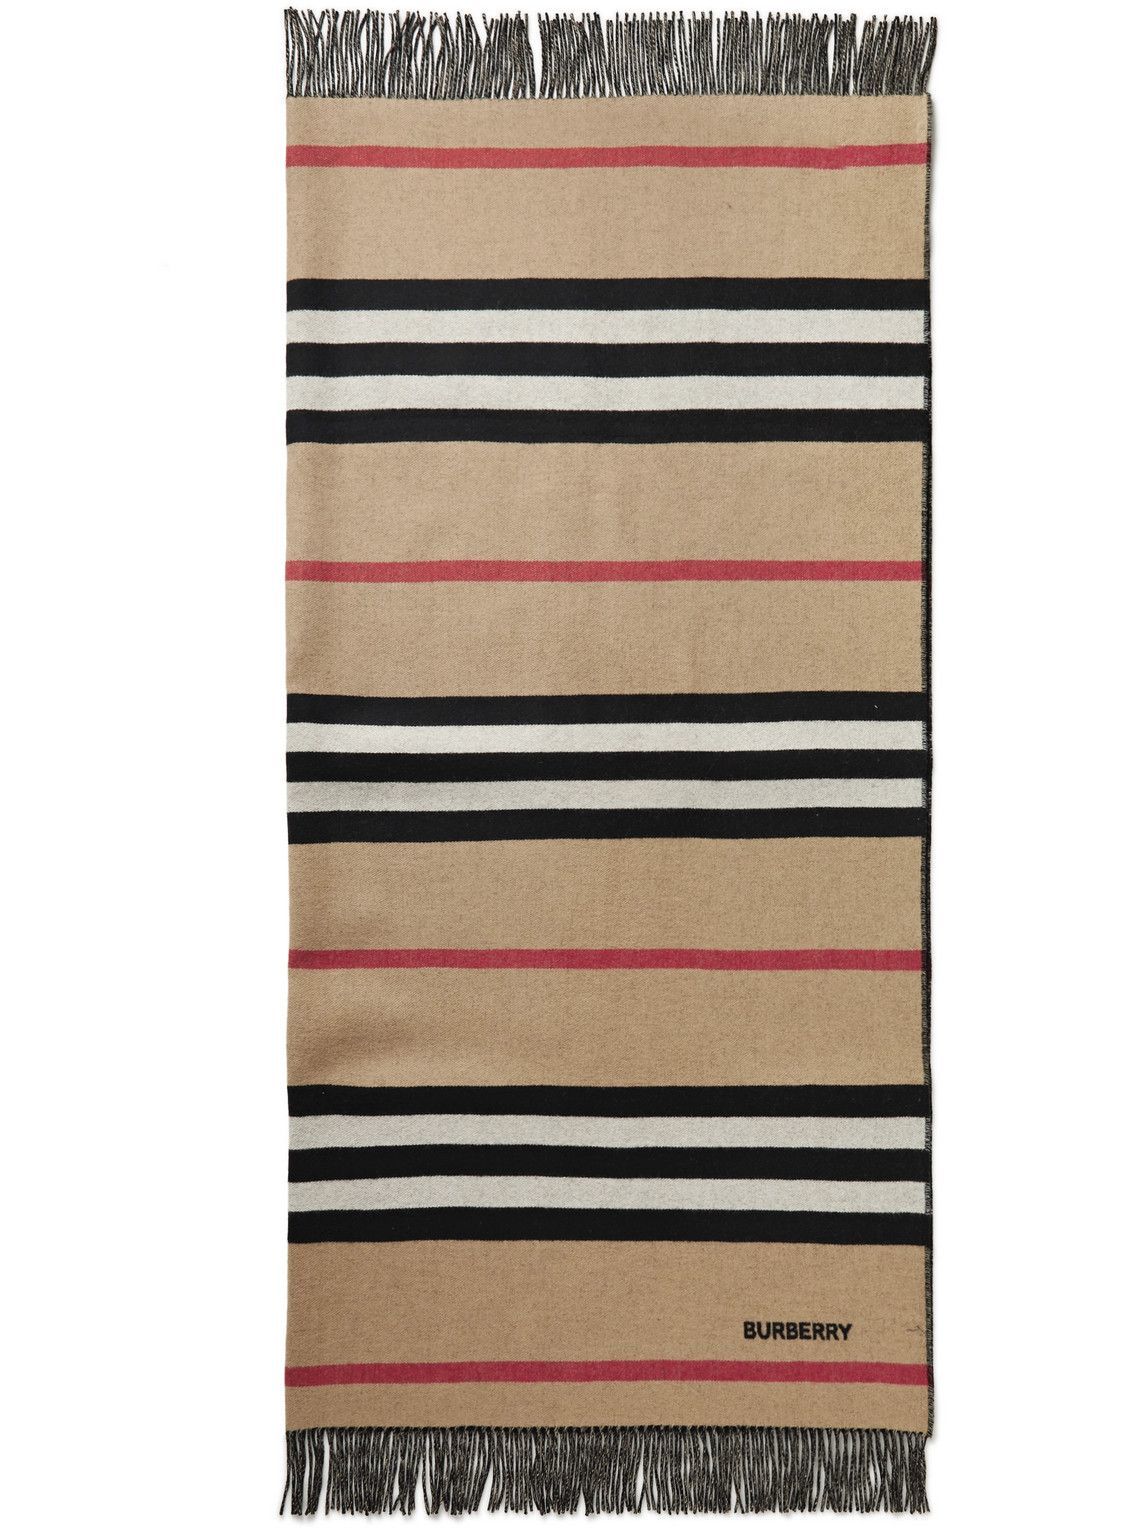 Burberry - Fringed Striped Cashmere Blanket